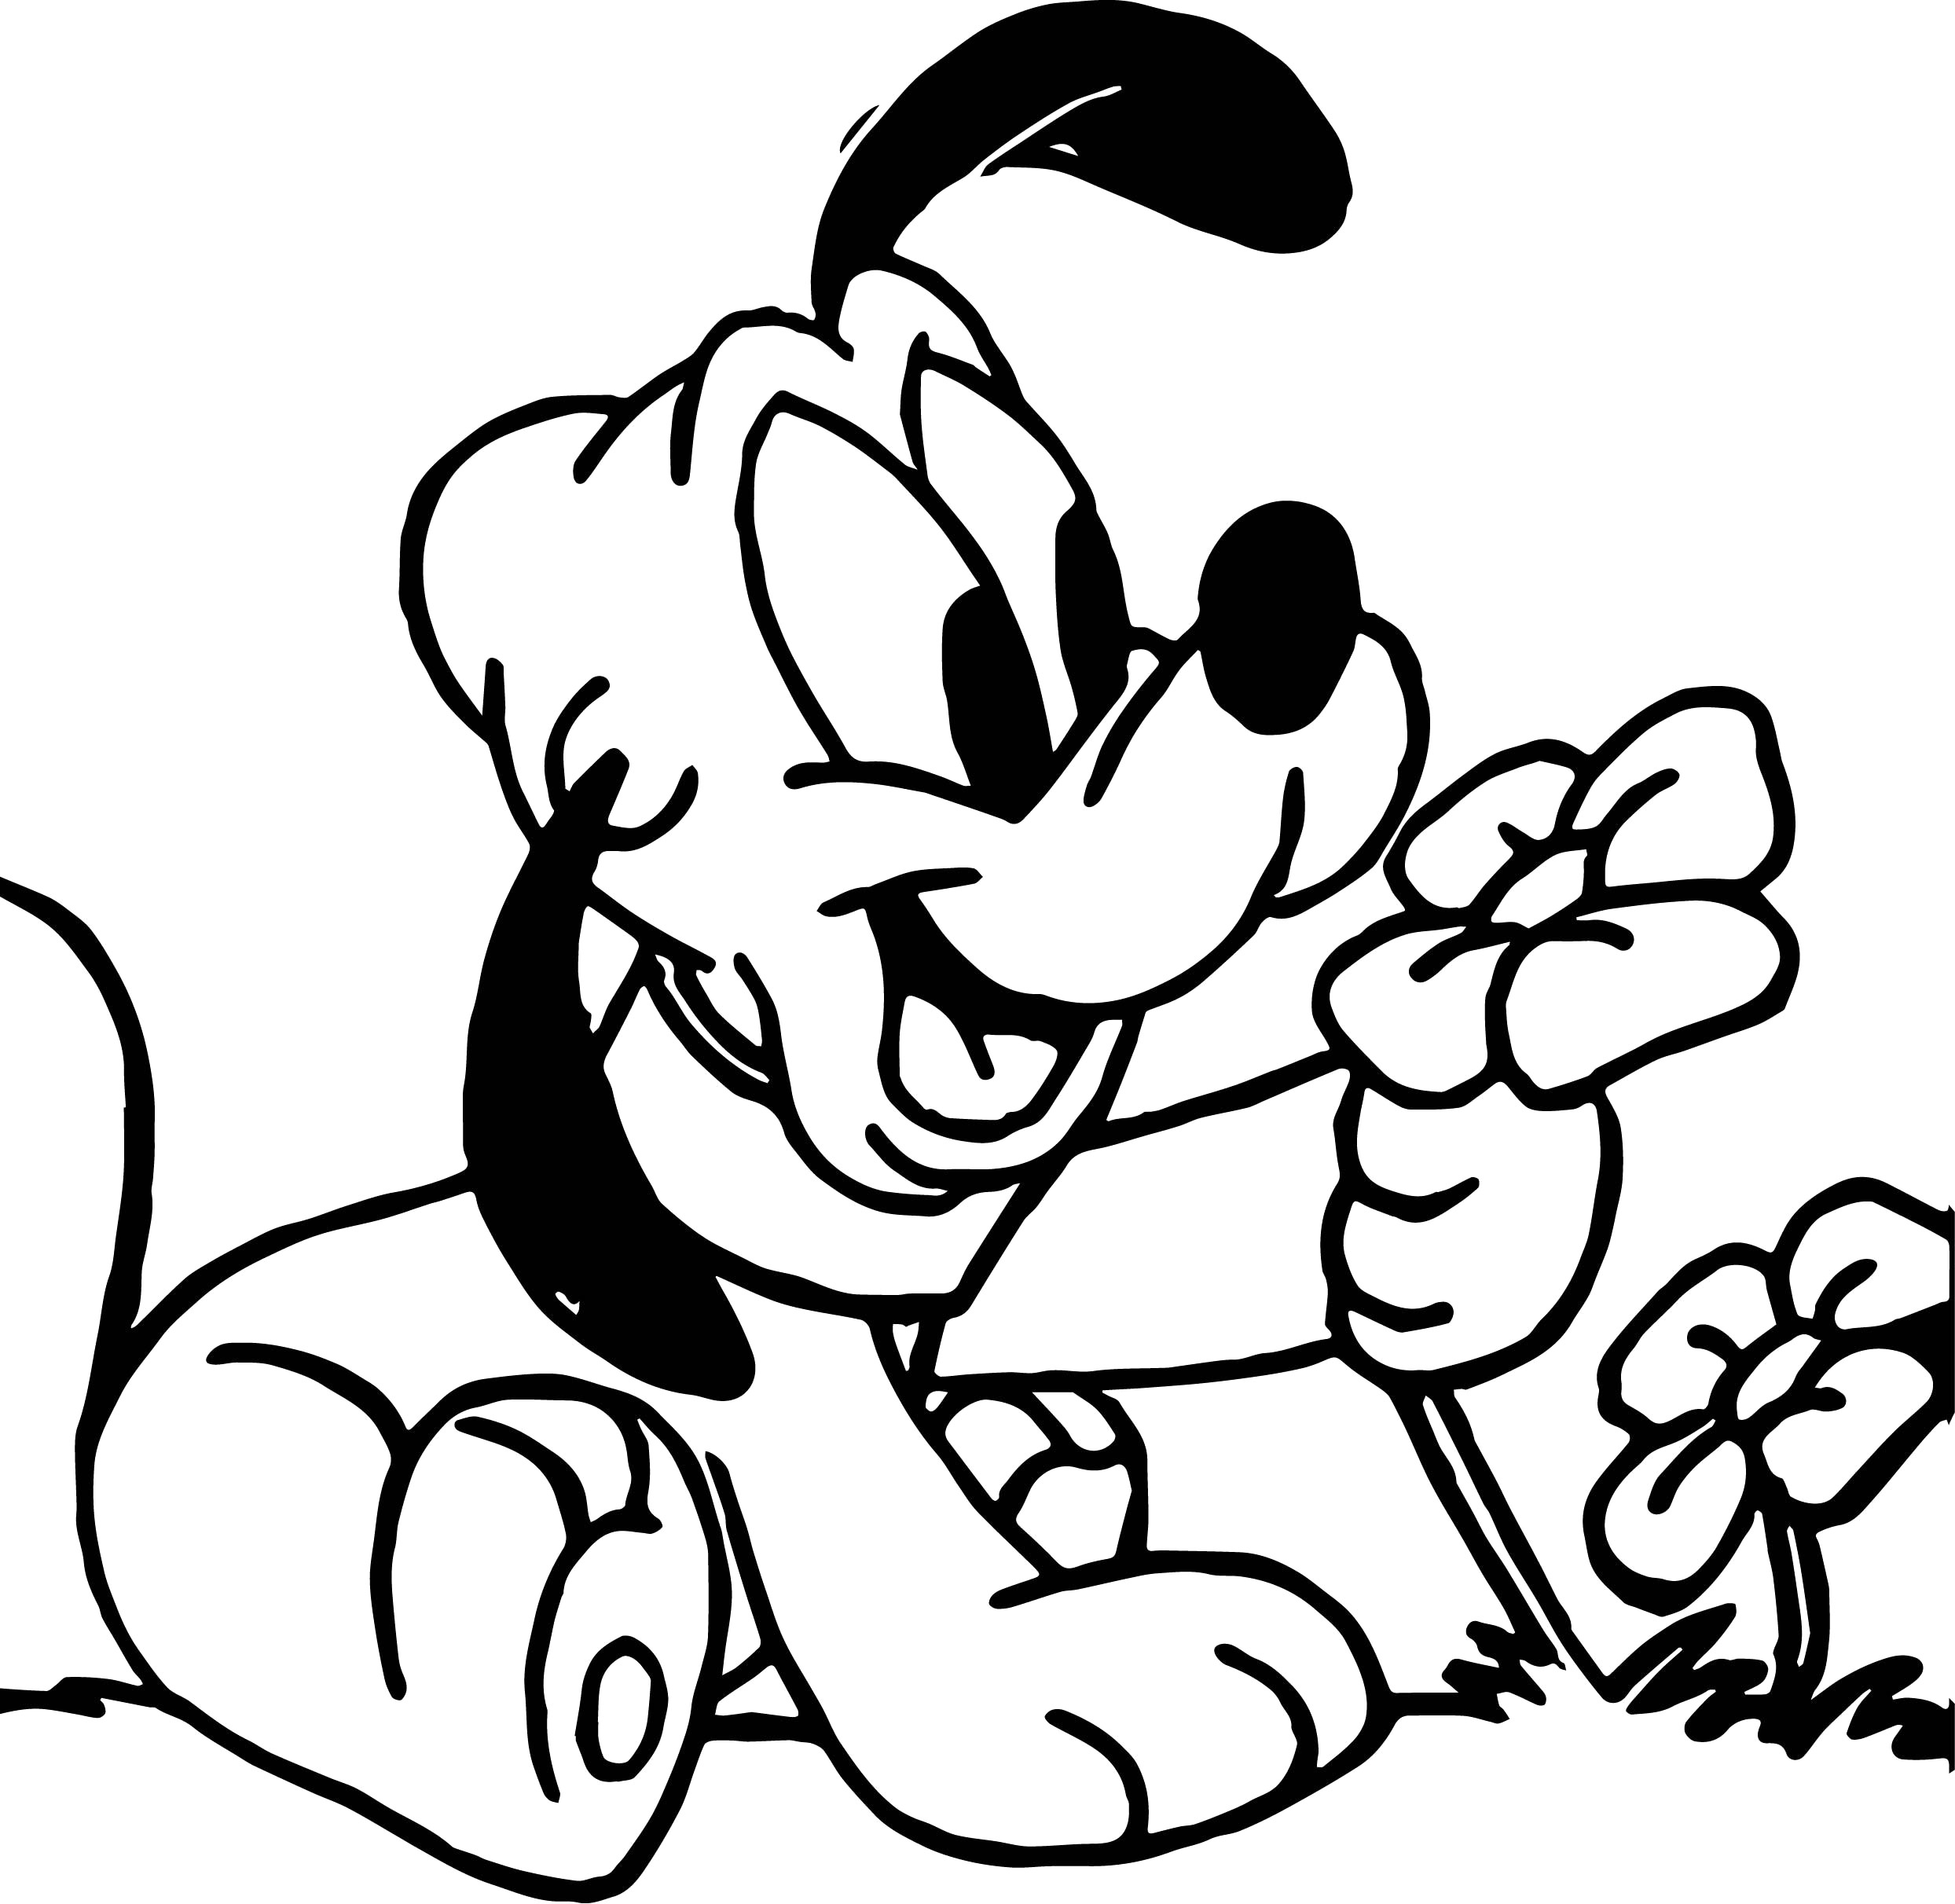 520 Cute Pluto Coloring Pages with Animal character